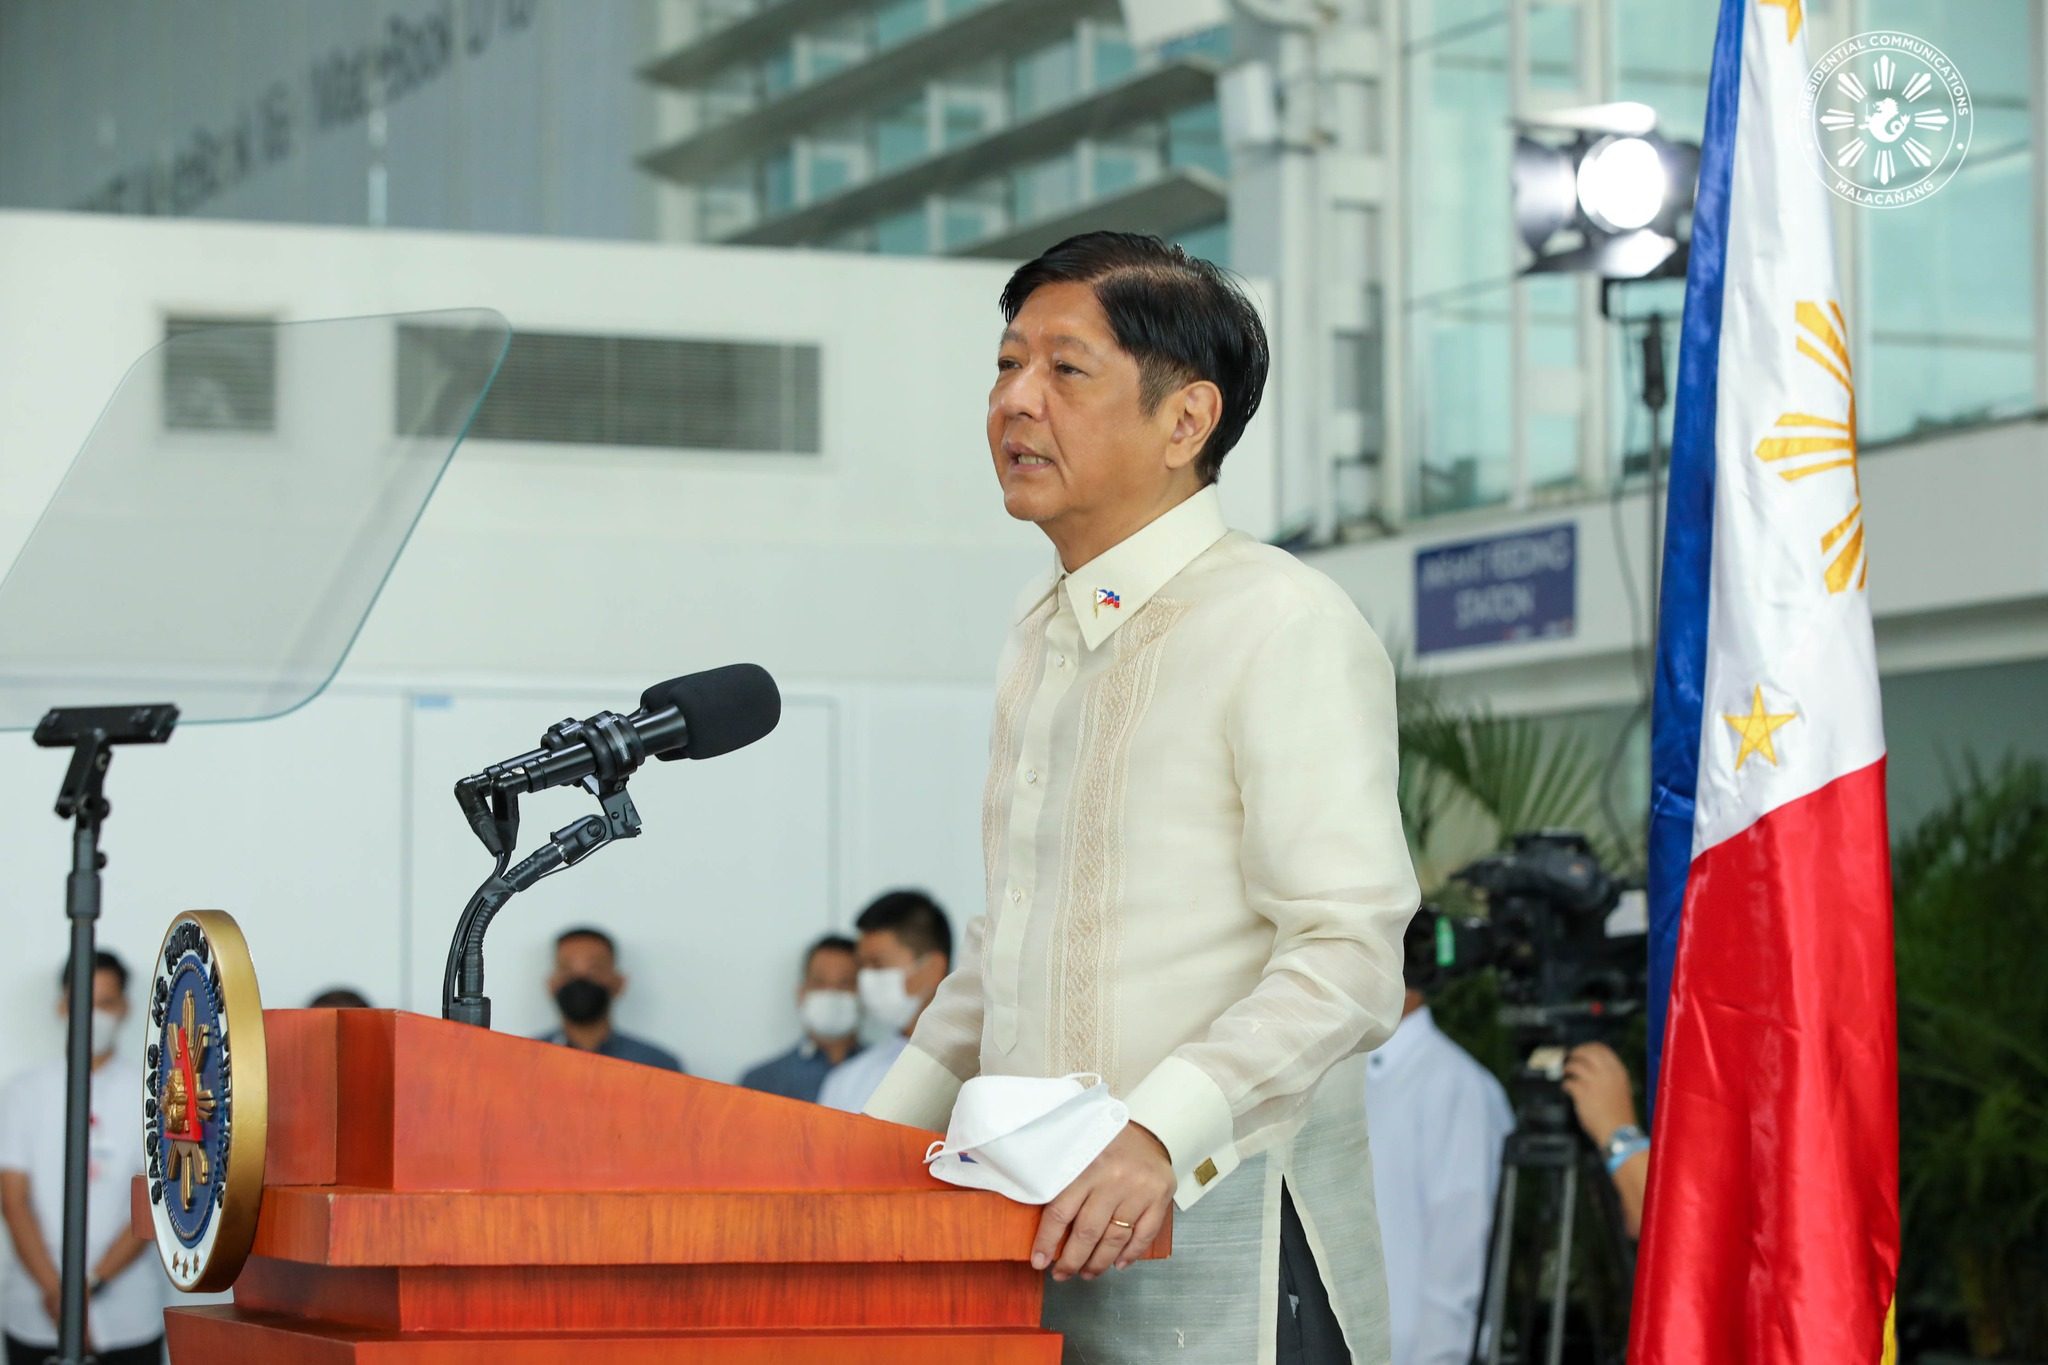 In world debut, Marcos to address UN General Assembly